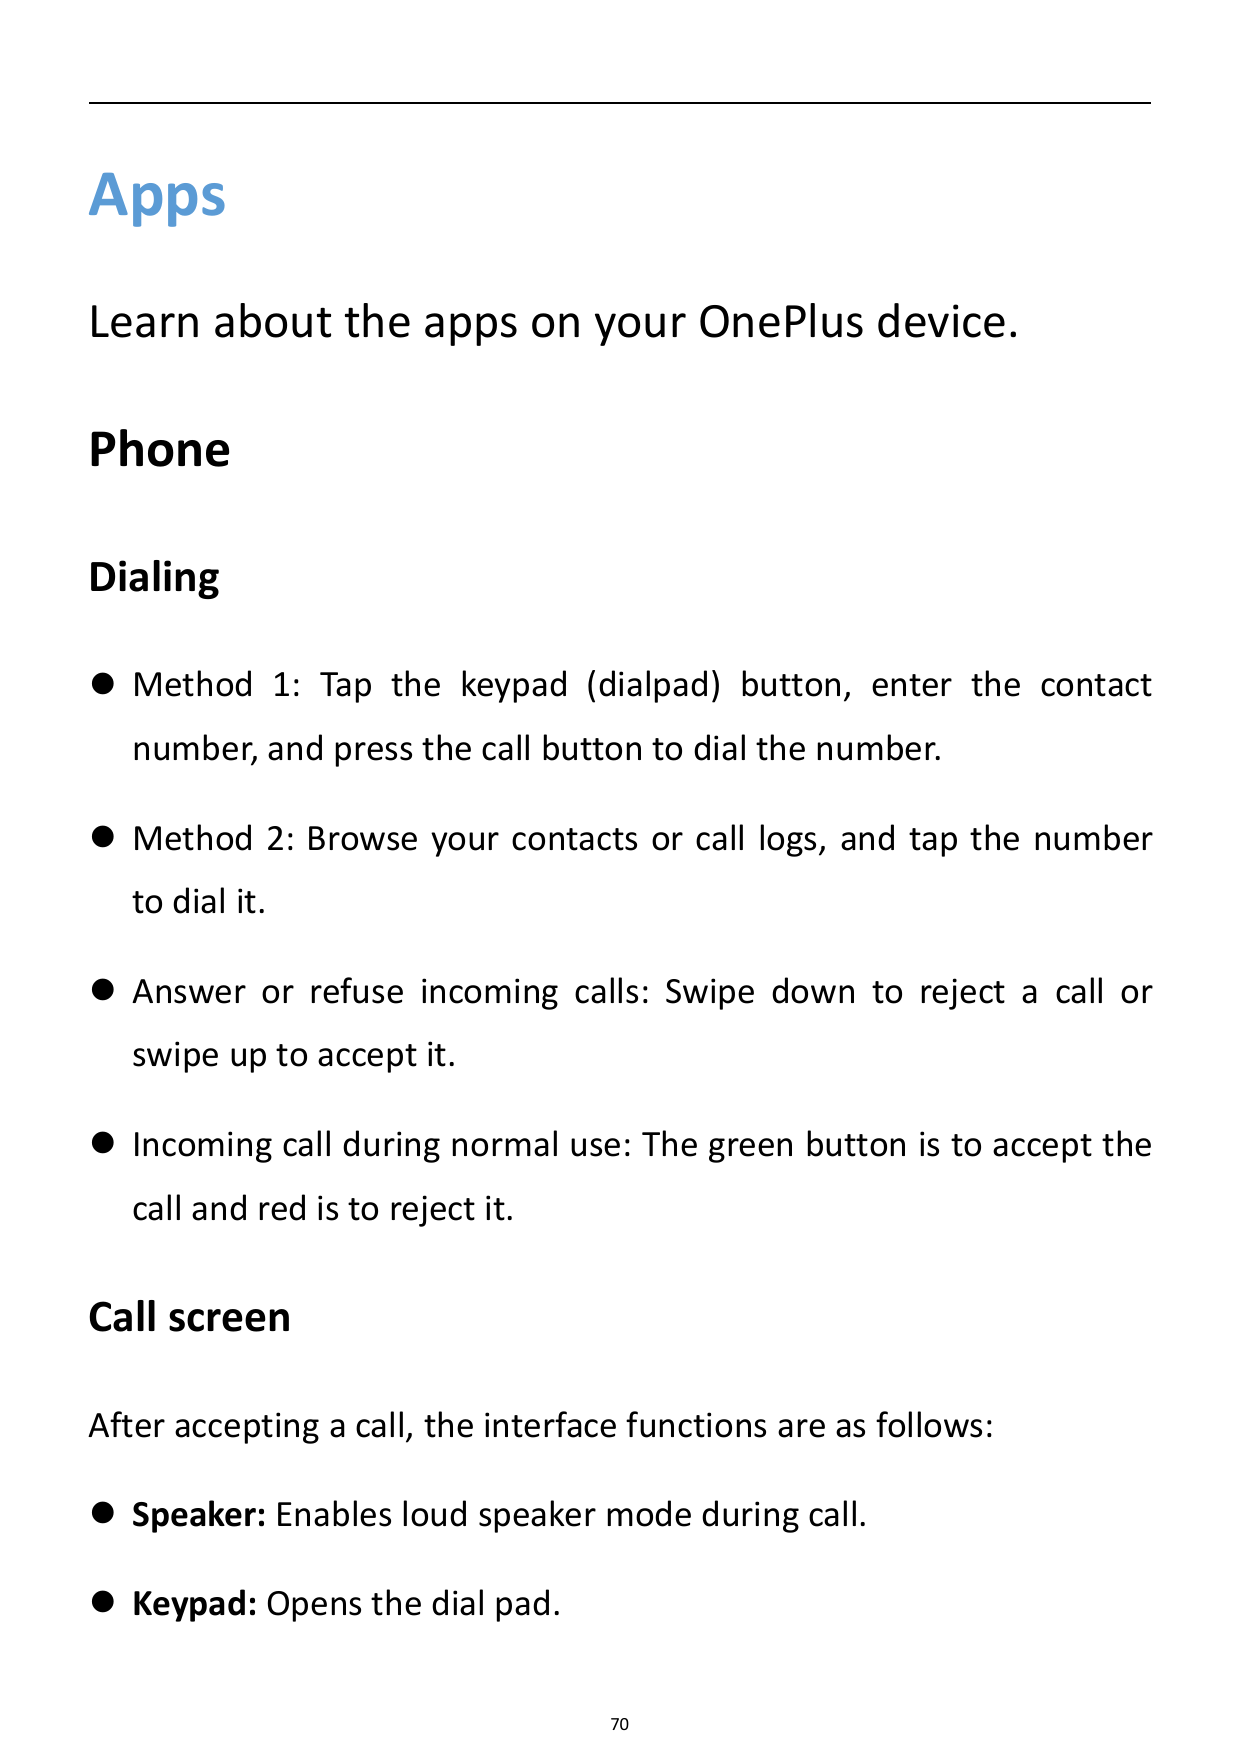 AppsLearn about the apps on your OnePlus device.PhoneDialing Method 1: Tap the keypad (dialpad) button, enter the contactnumber